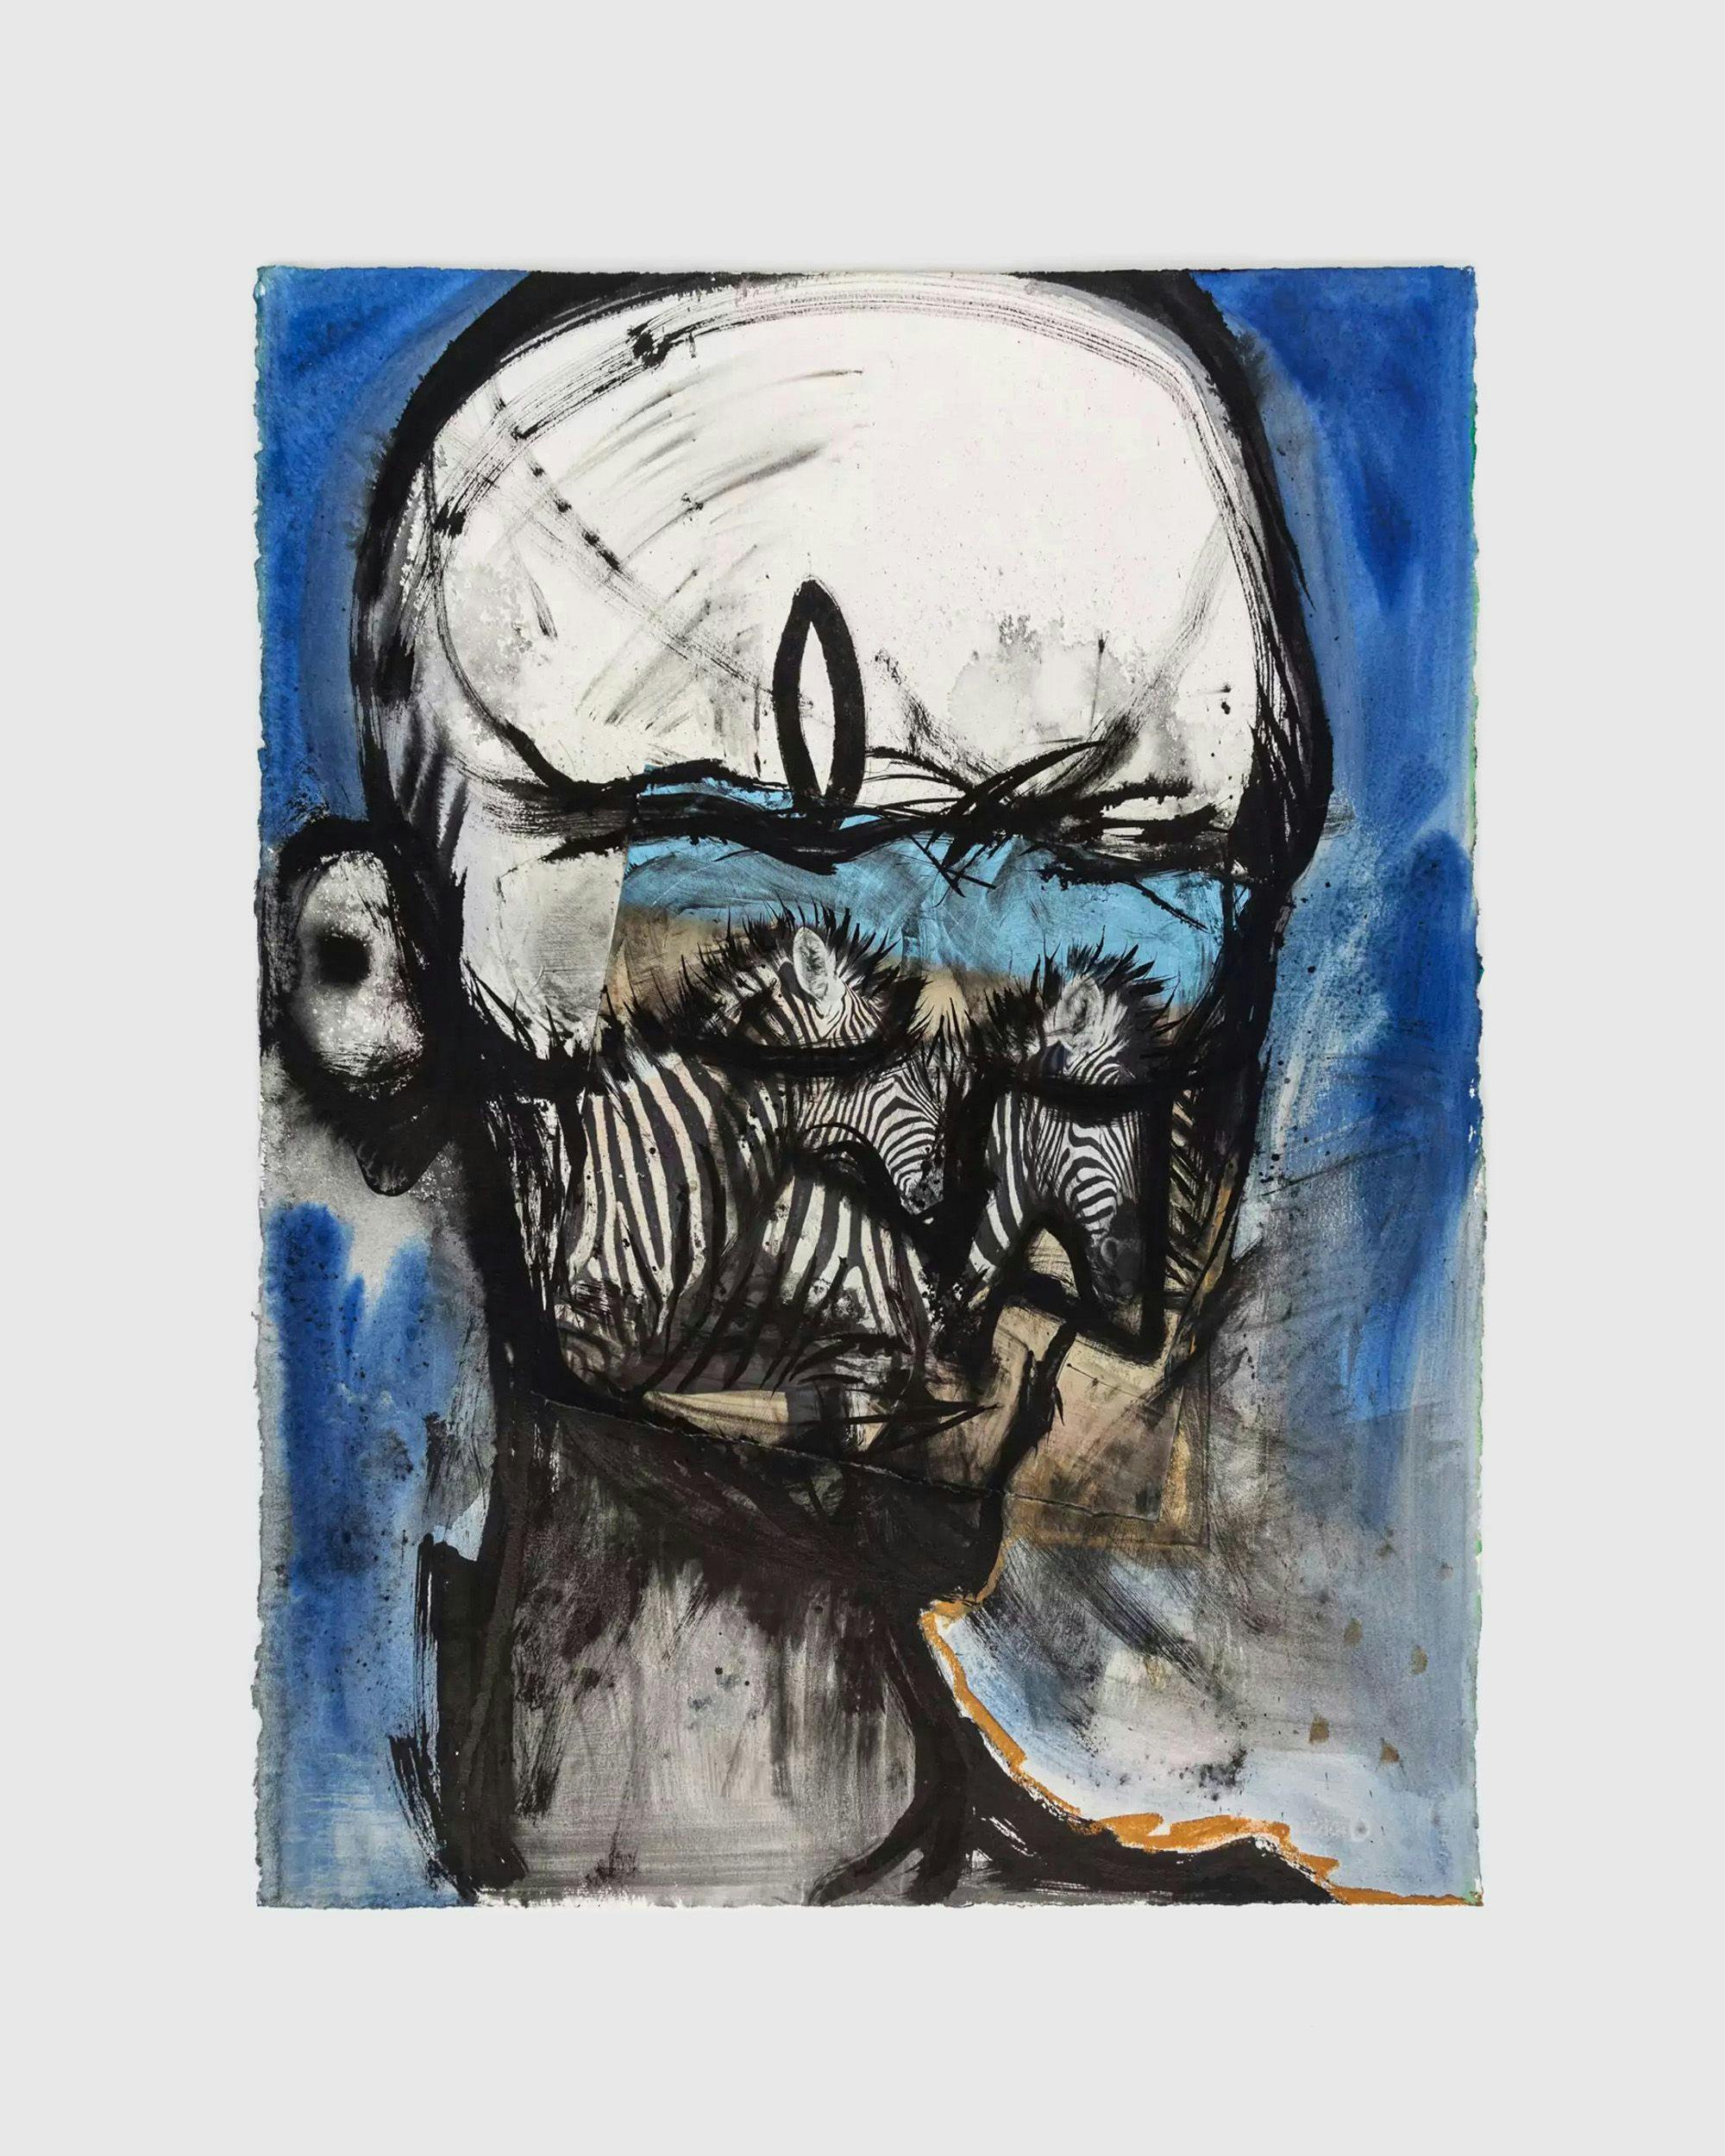 An ink, acrylic, pastel, and collage on paper artwork by Huma Bhabha, titled Untitled, dated 2020.